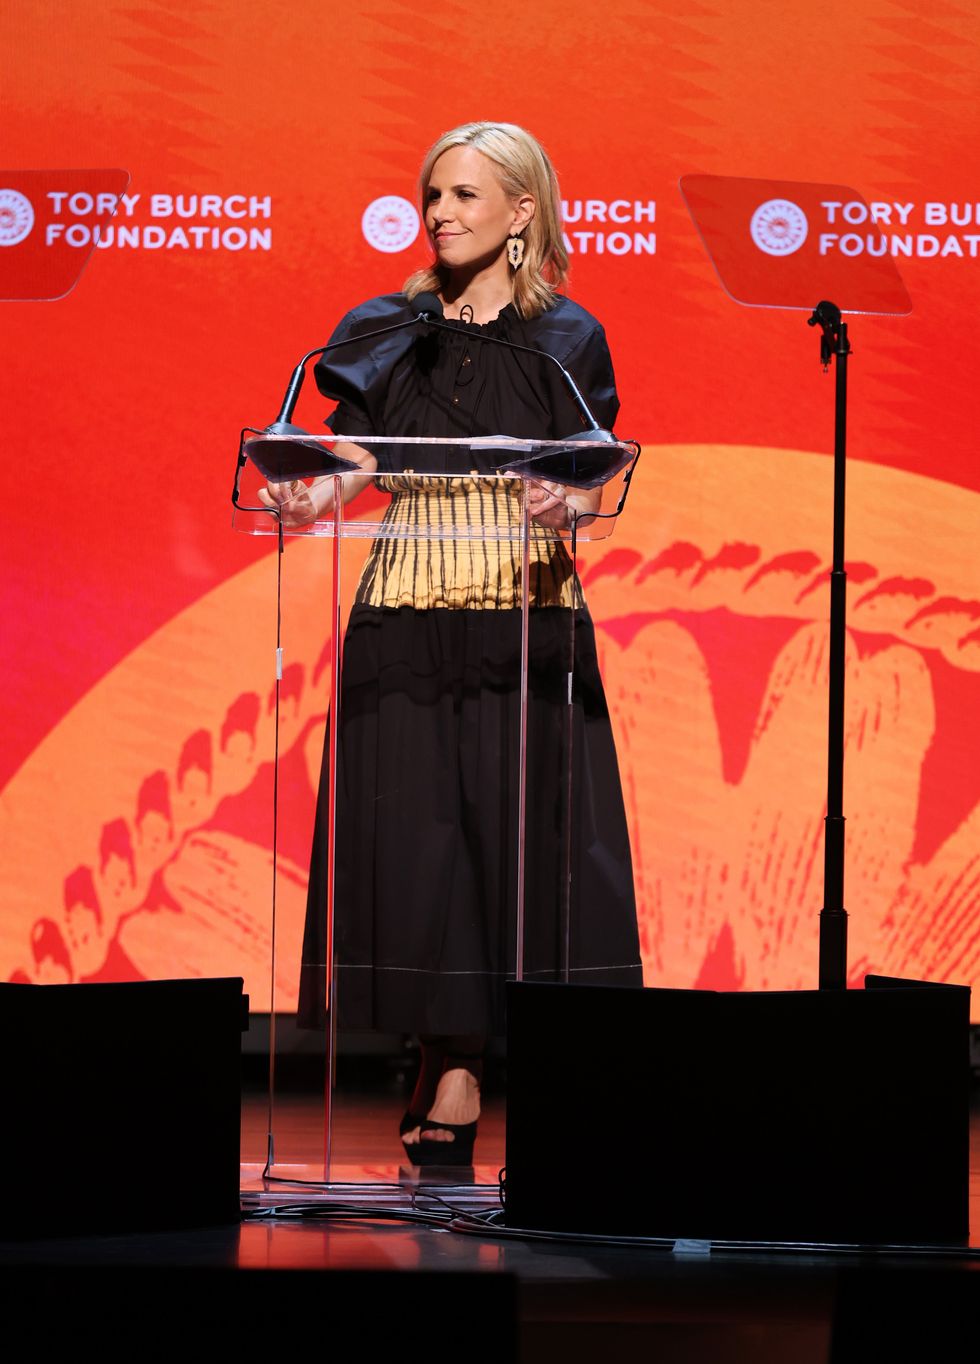 tory burch speaks onstage at the 2022 embrace ambition summit